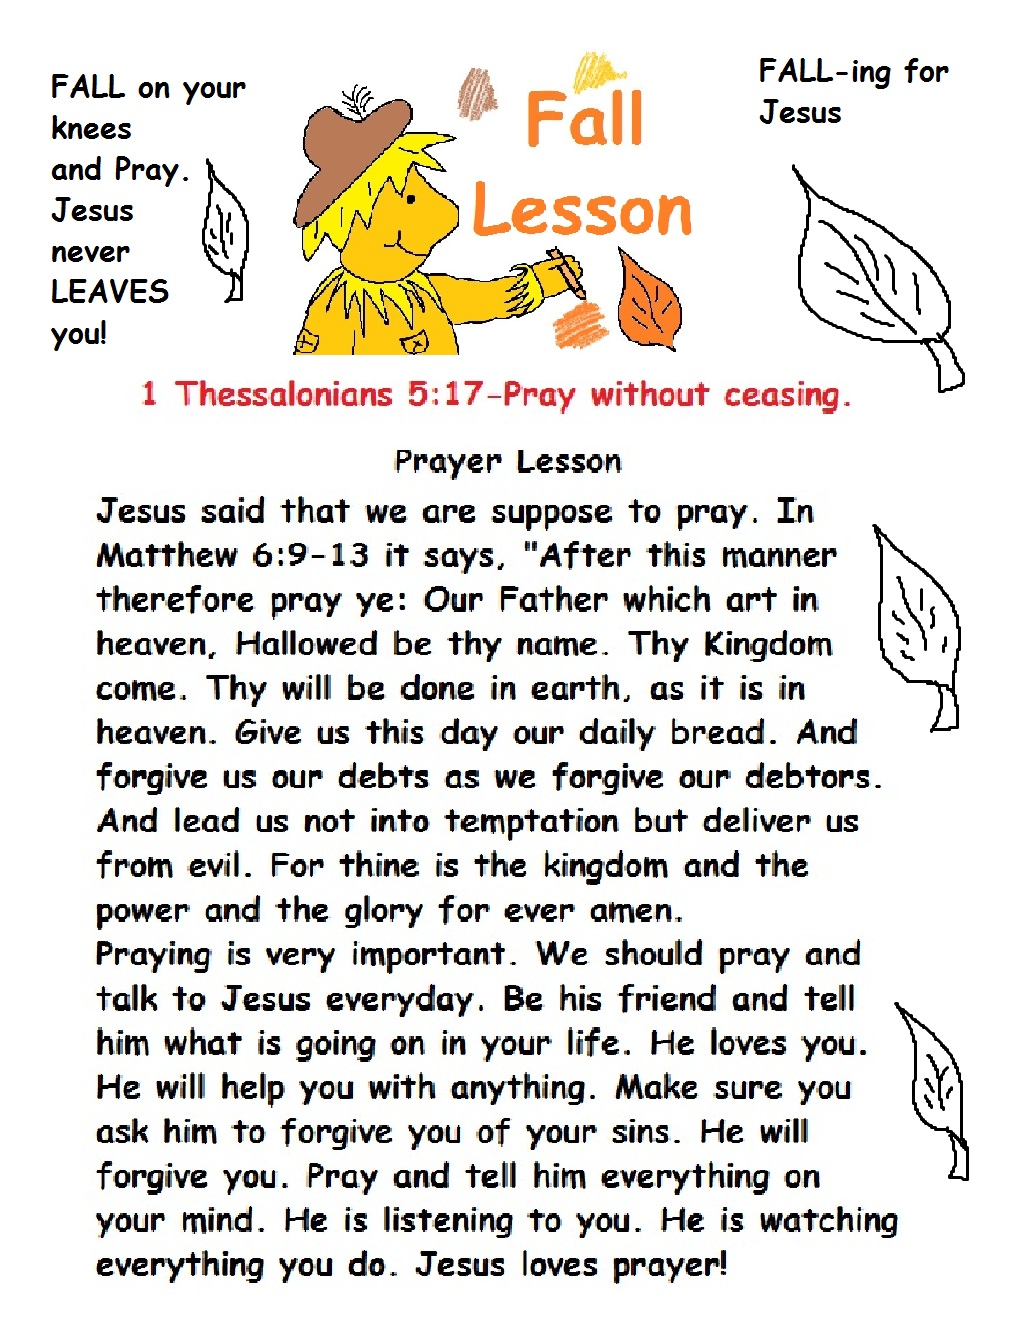 activities-bible-lessons-for-kids-sunday-school-lessons-54-bible